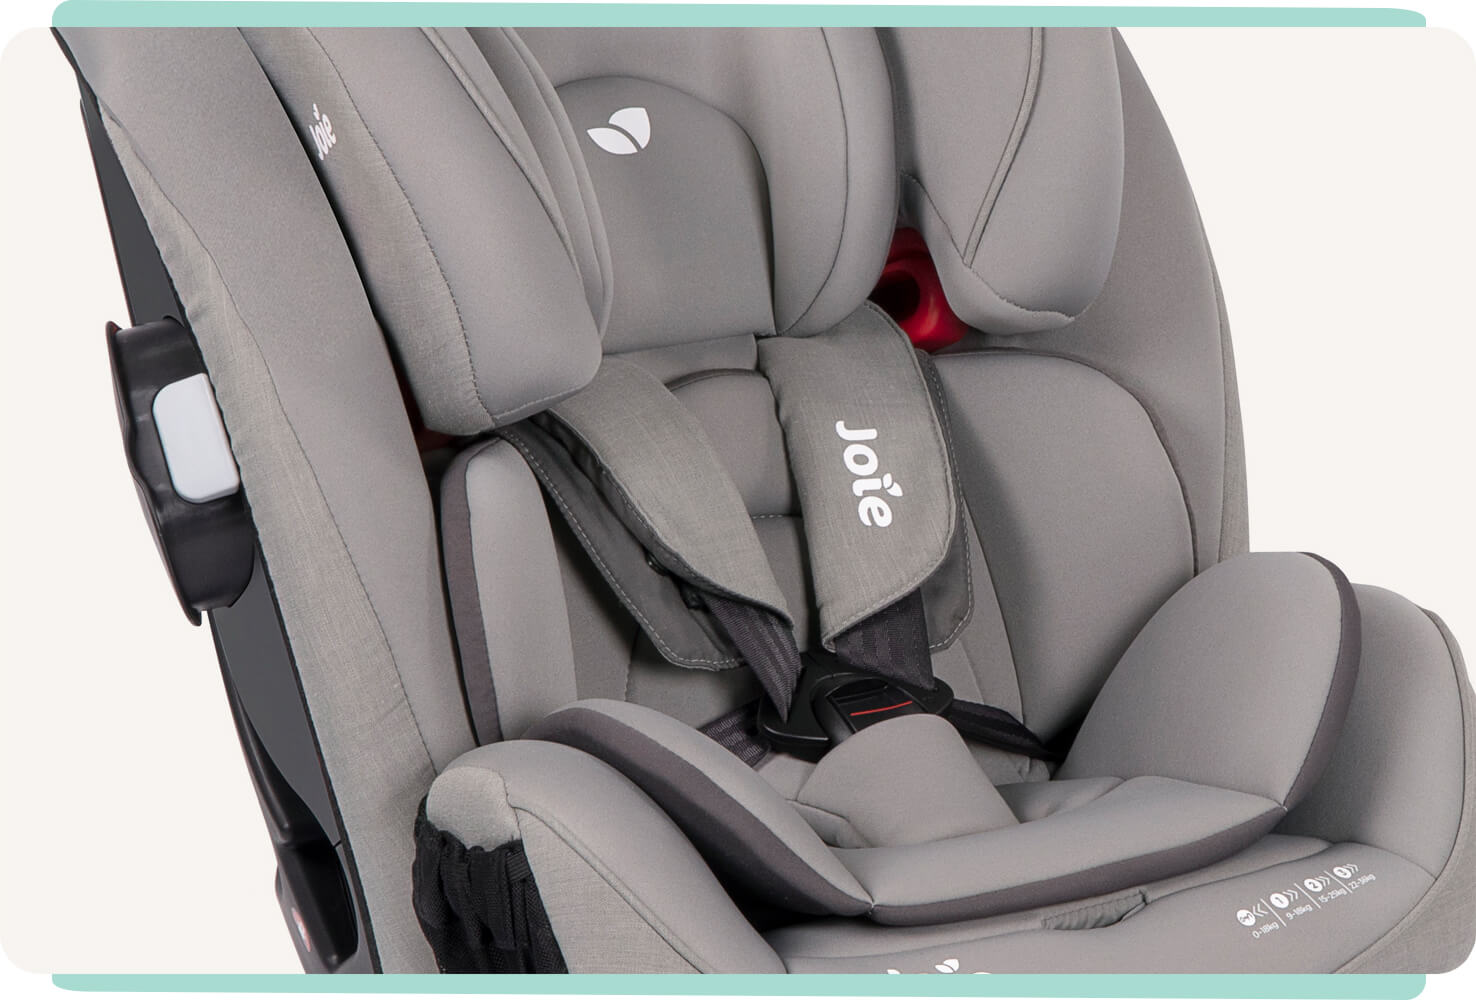   Closeup of a light gray Joie Every Stage FX car seat showing the 5-point harness and infant insert.